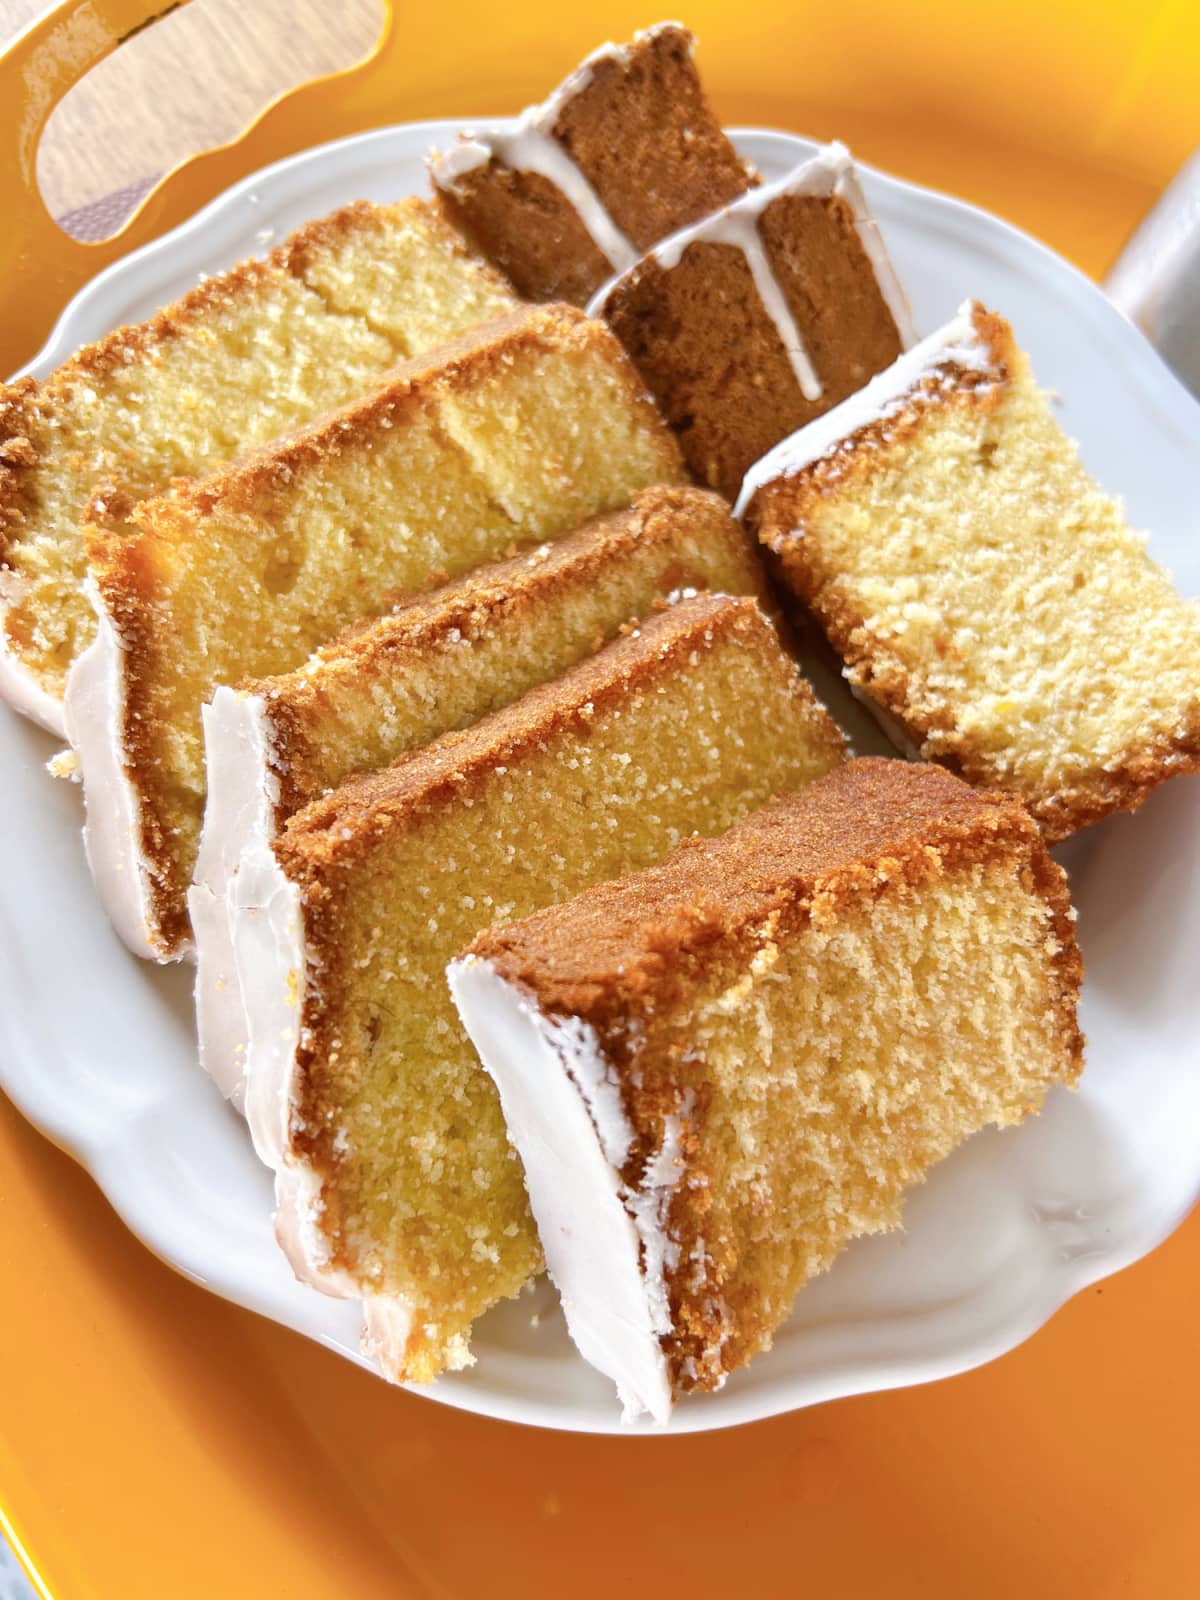 Slices of cake with a glaze frosting